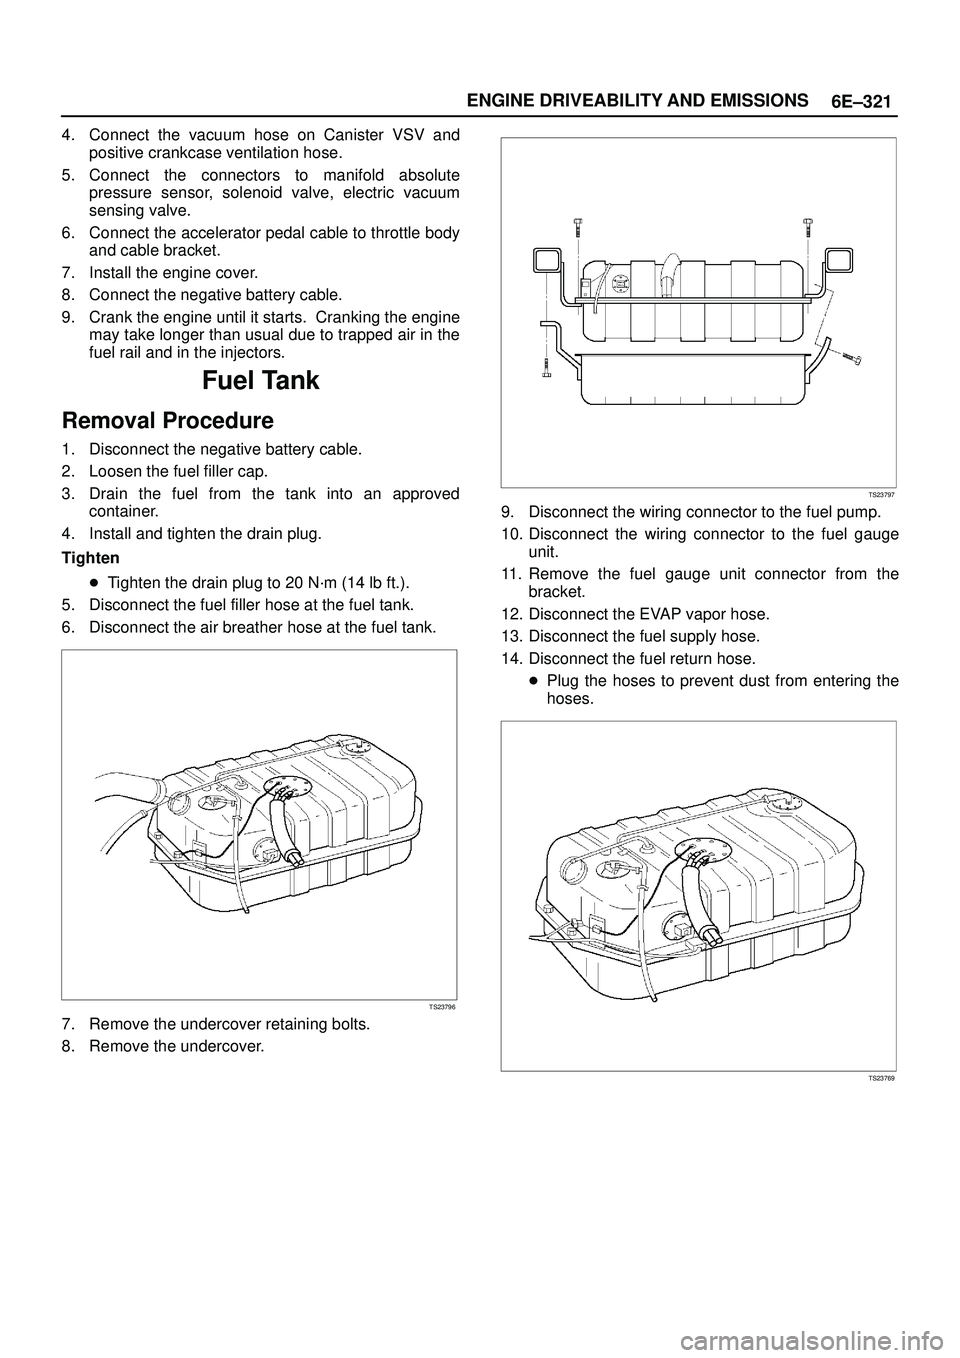 ISUZU TROOPER 1998  Service Service Manual 6E±321 ENGINE DRIVEABILITY AND EMISSIONS
4. Connect the vacuum hose on Canister VSV and
positive crankcase ventilation hose.
5. Connect the connectors to manifold absolute
pressure sensor, solenoid v